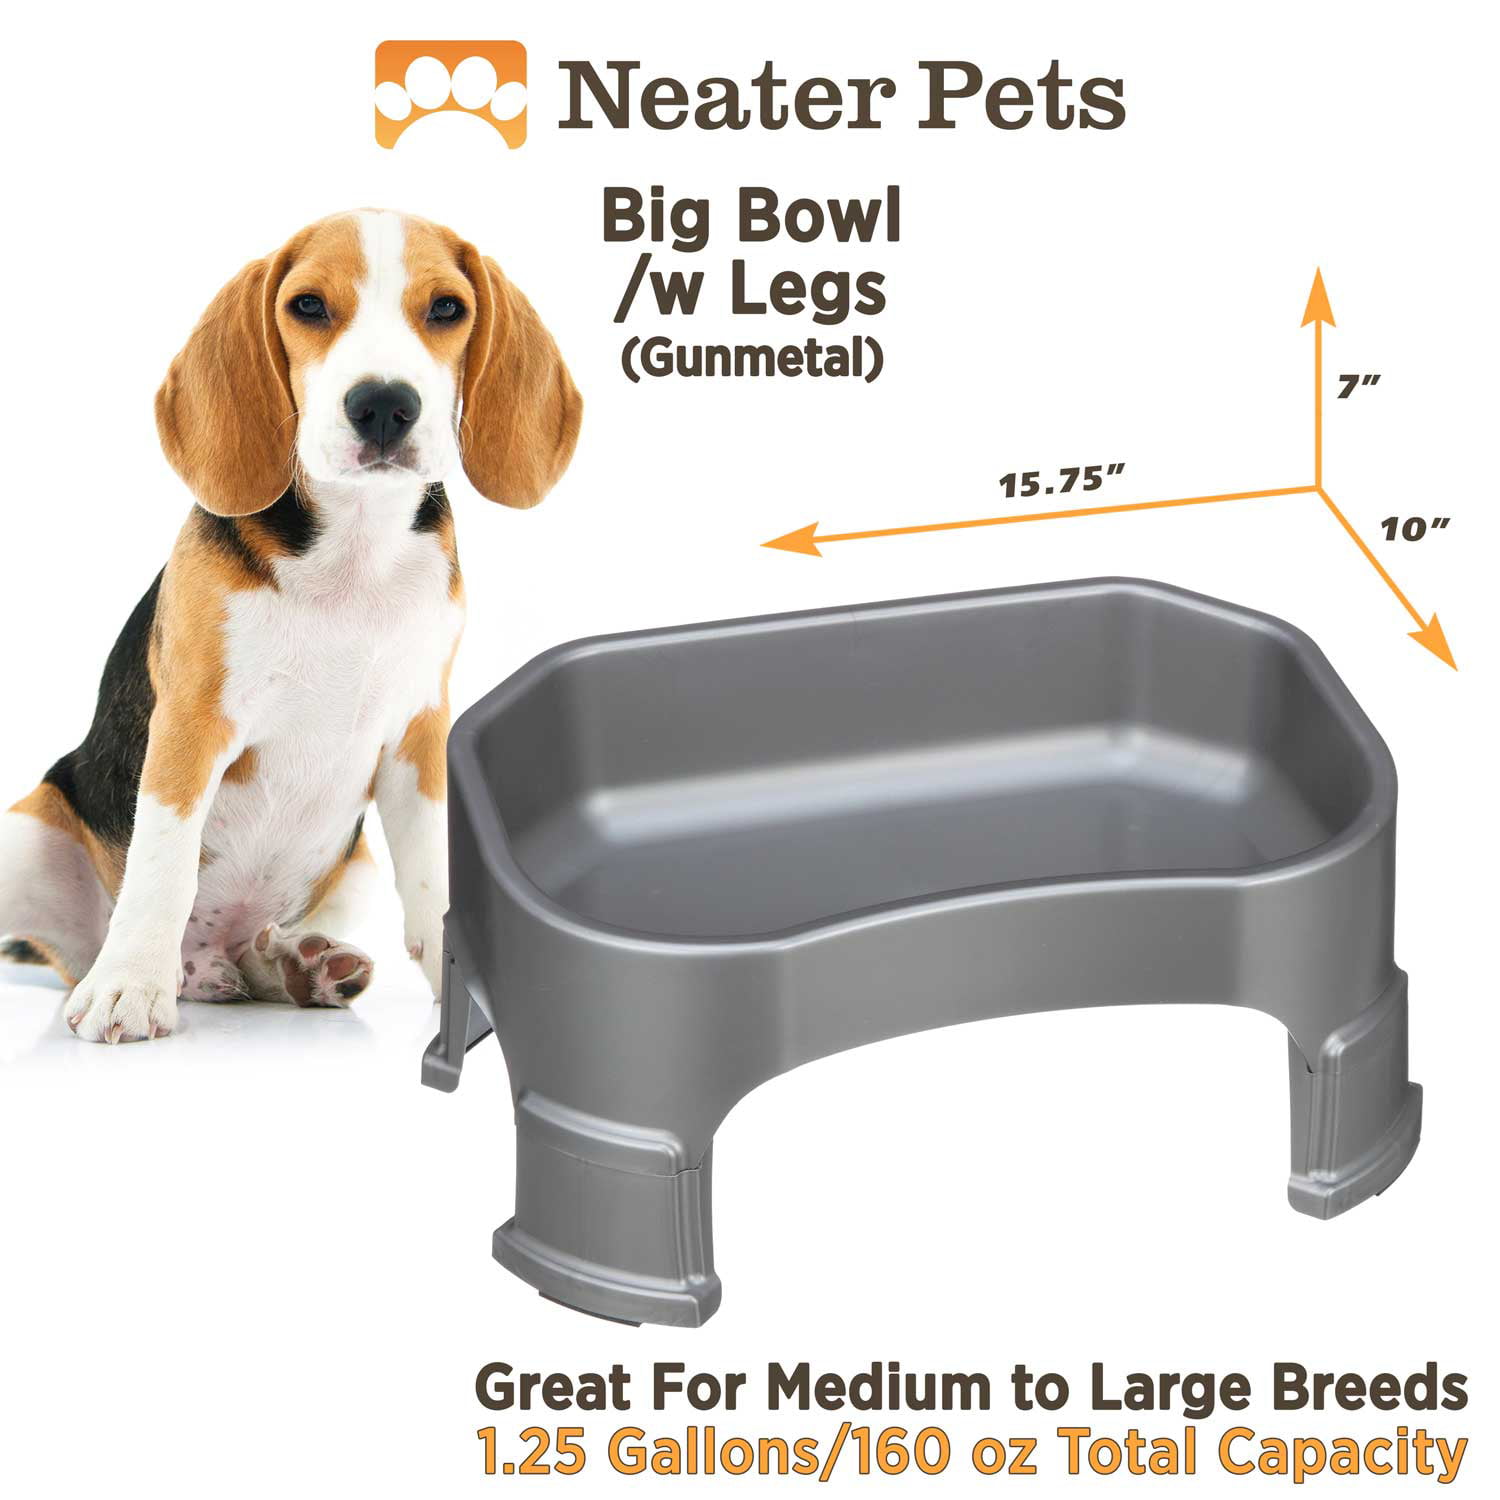 Big Bowl - Extra Large Water Bowl for Dogs (1.25 Gallon Capacity